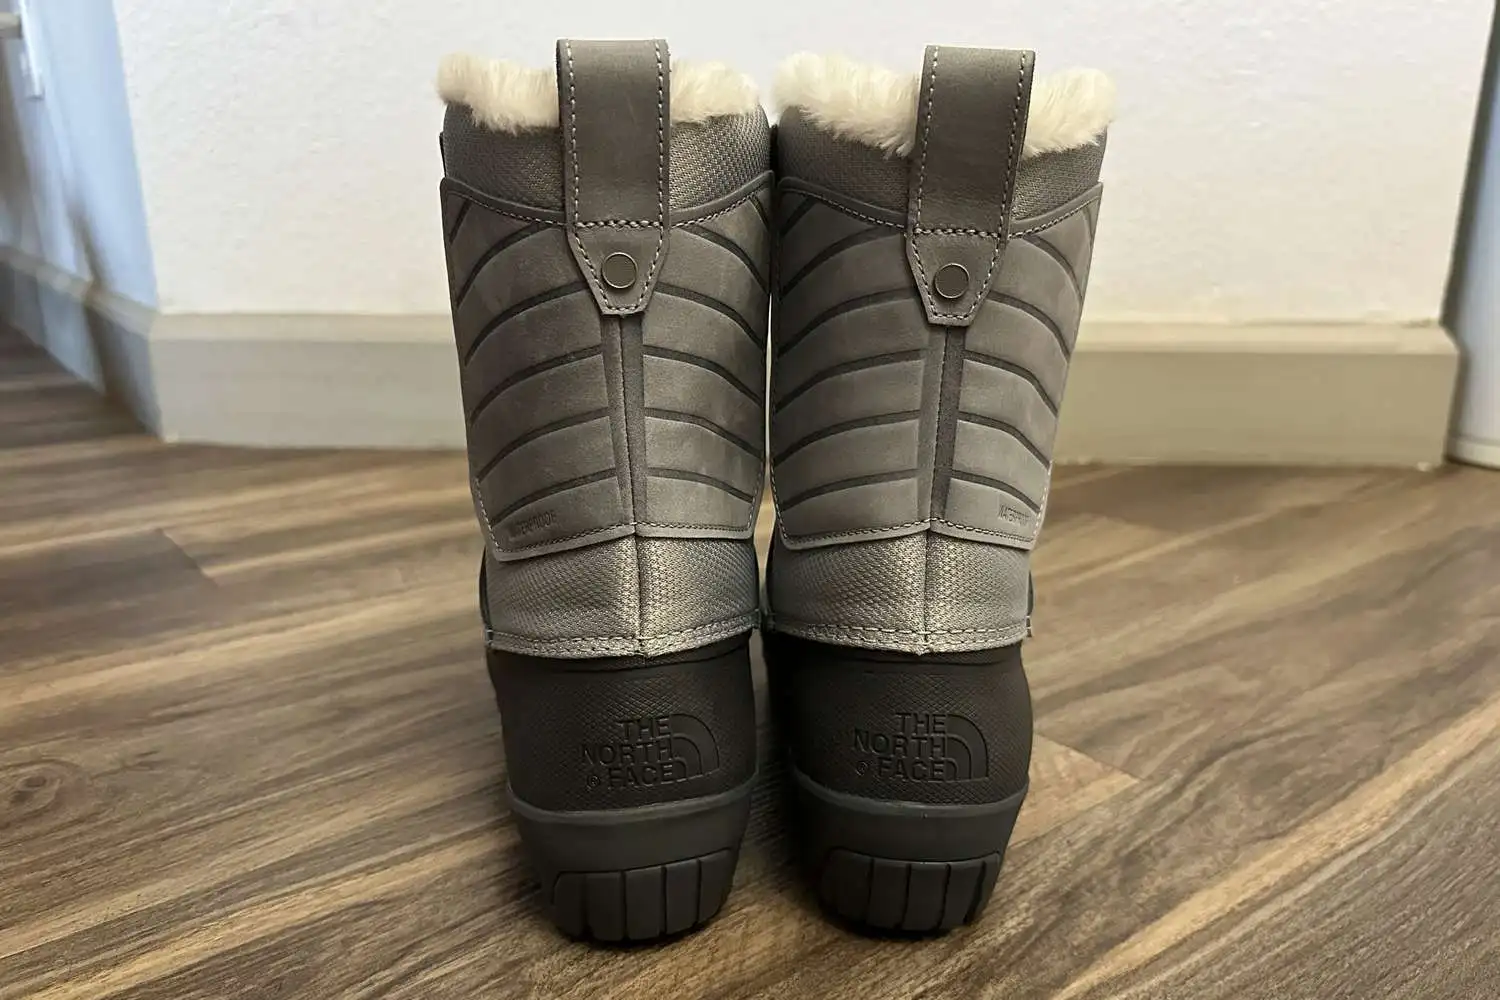 The North Face Shellista IV Mid WP Boot from behind